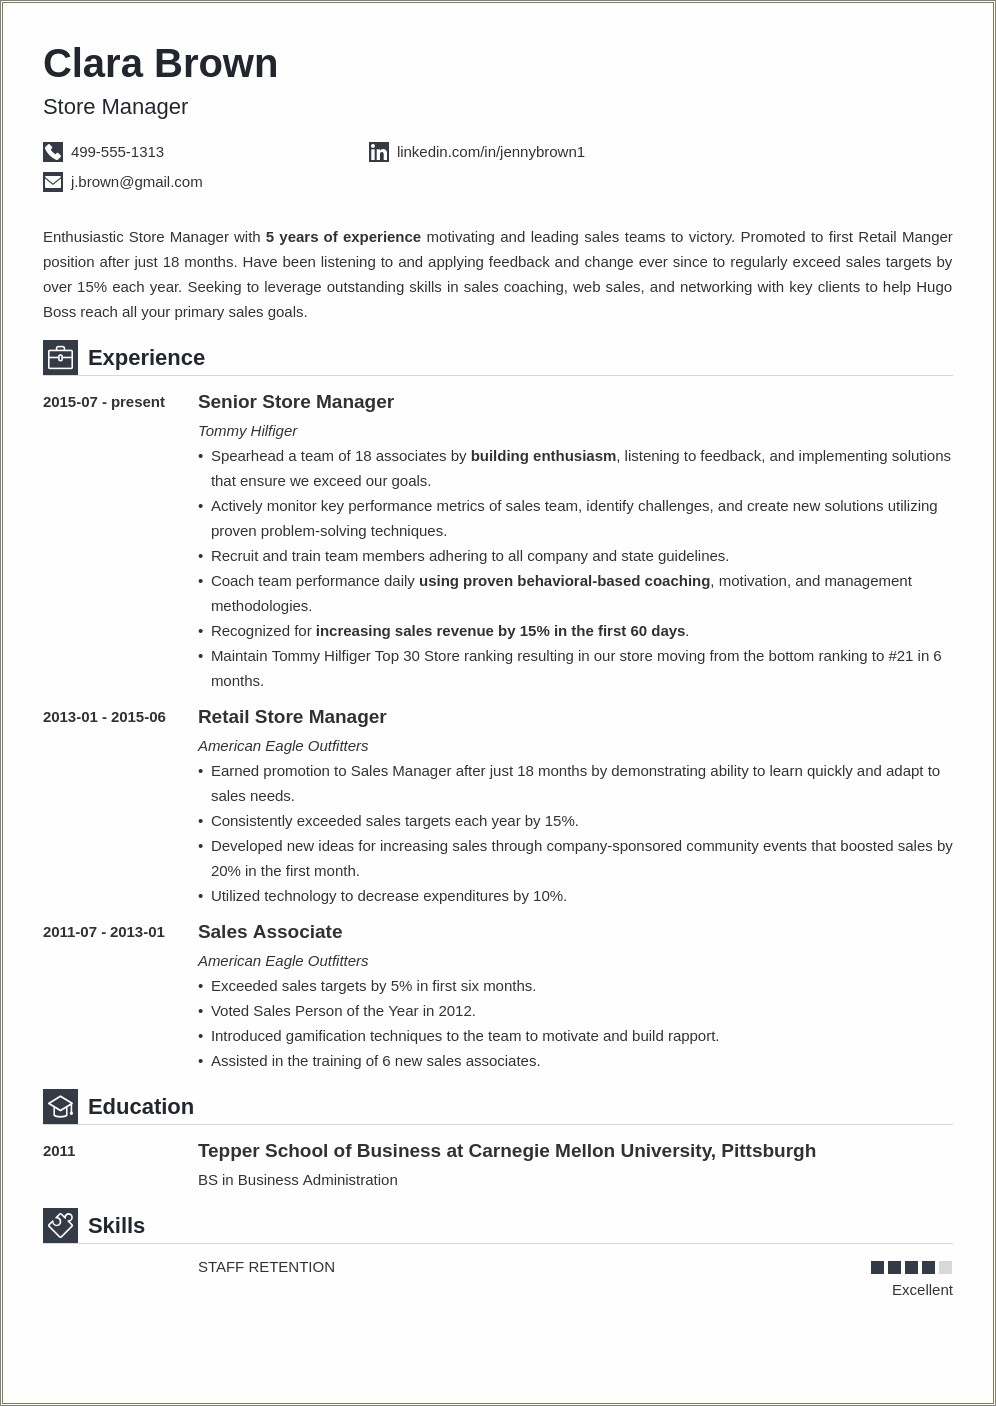 Resume Discription For A Store Manager